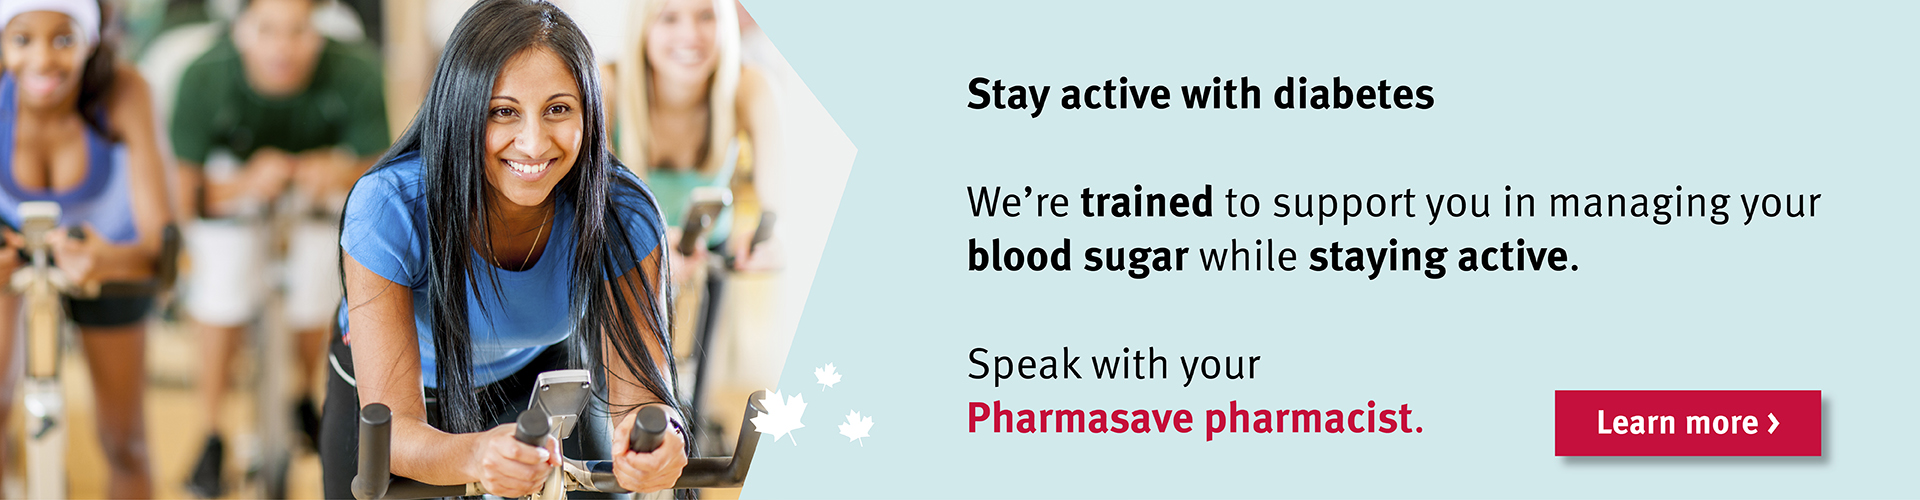 Stay active with Diabetes.